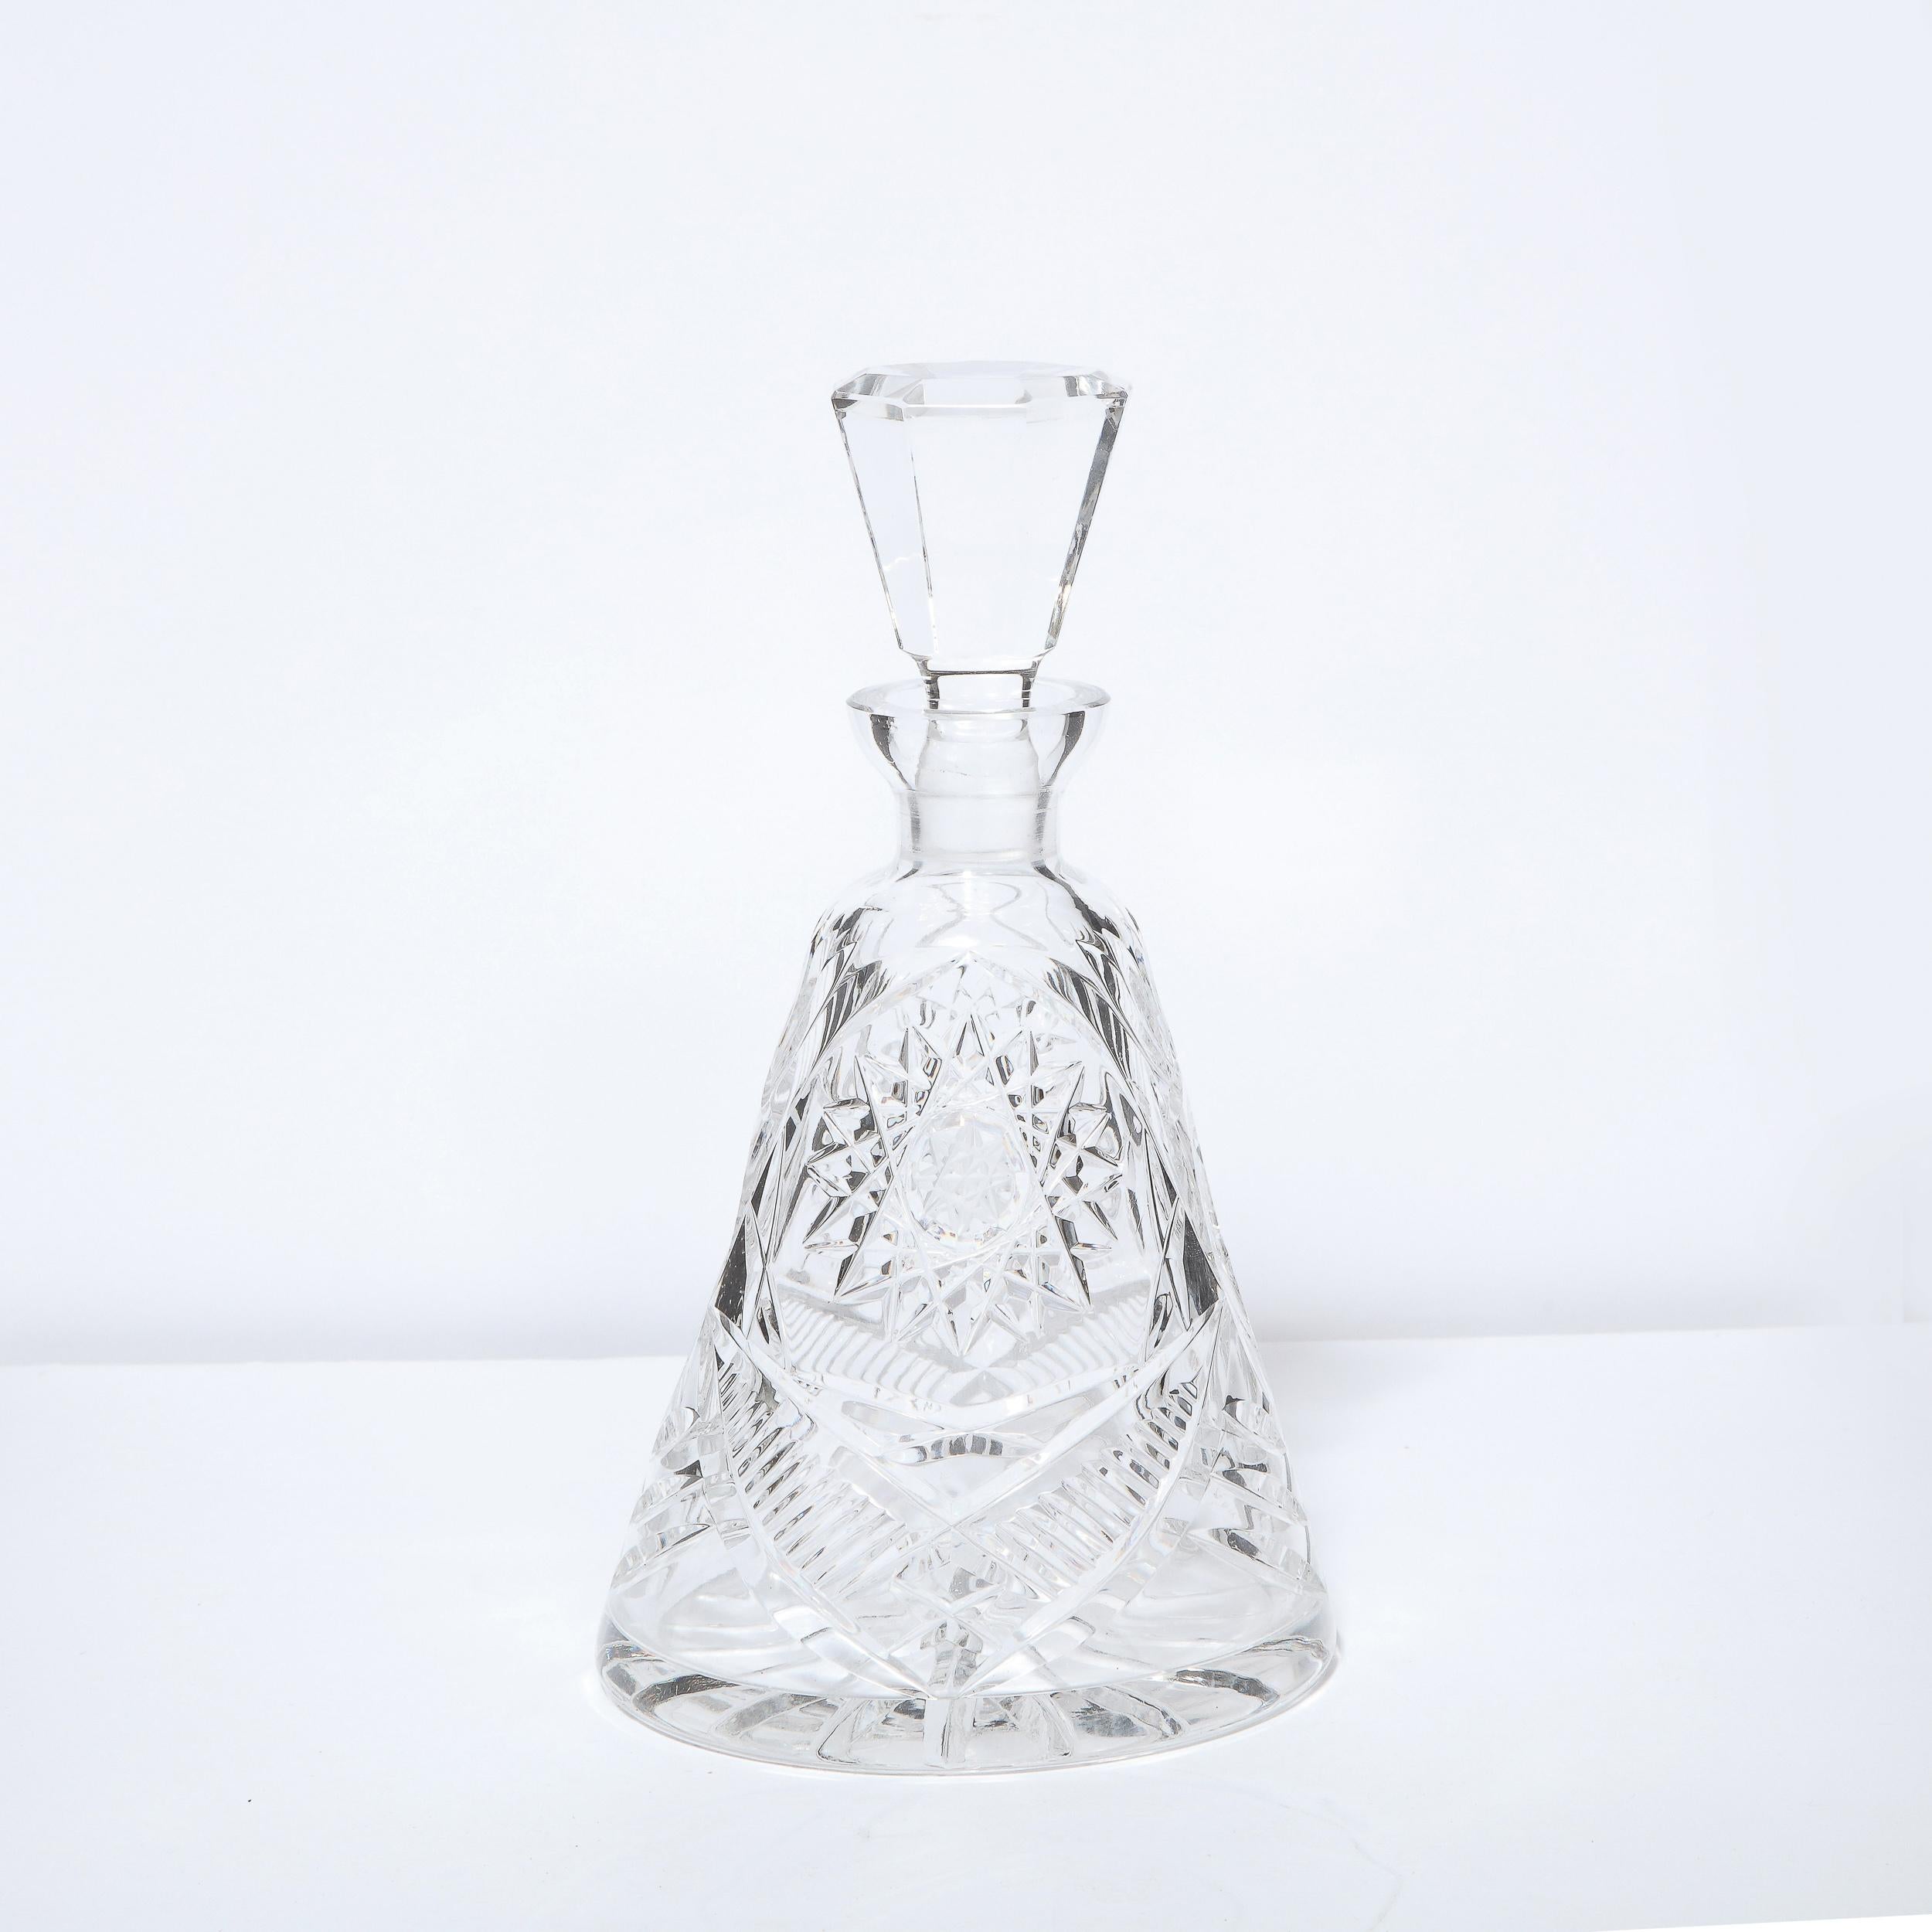 This stunning Mid-Century Modern crystal decanter was realized in the United States circa 1960. It features a conical body in translucent crystal with a wealth of geometric patterns including starbursts and ovoid forms etched into body.